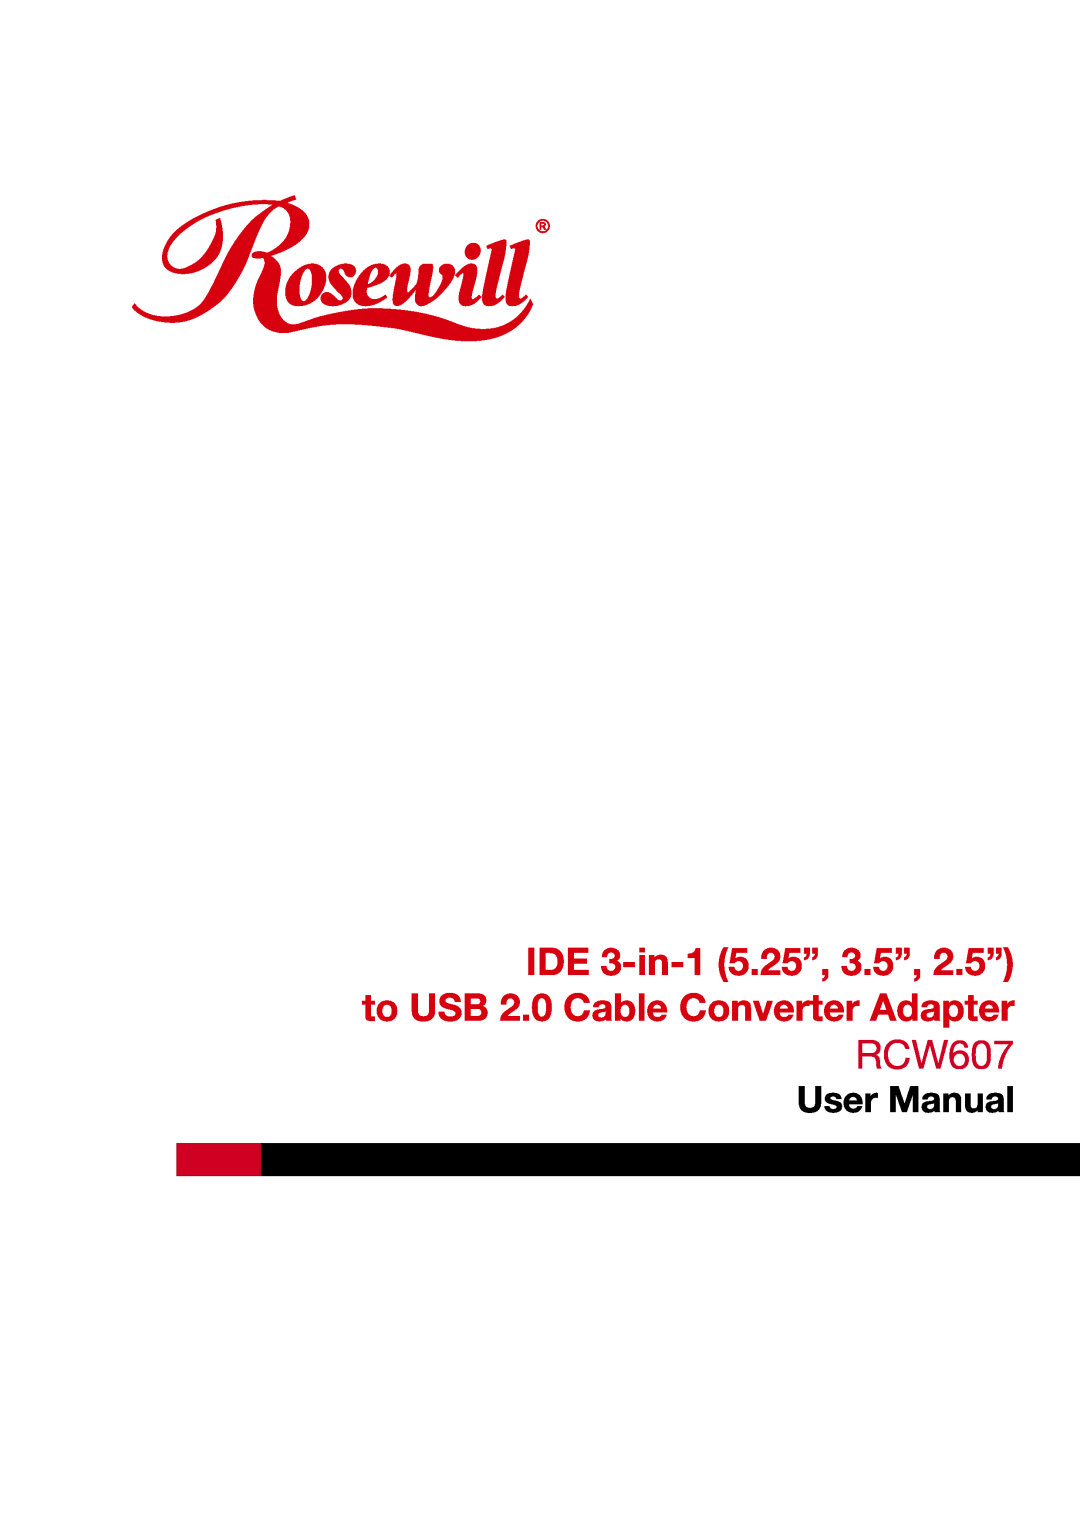 Rosewill user manual RCW607, IDE 3-in-1 5.25”, 3.5”, 2.5” to USB 2.0 Cable Converter Adapter 